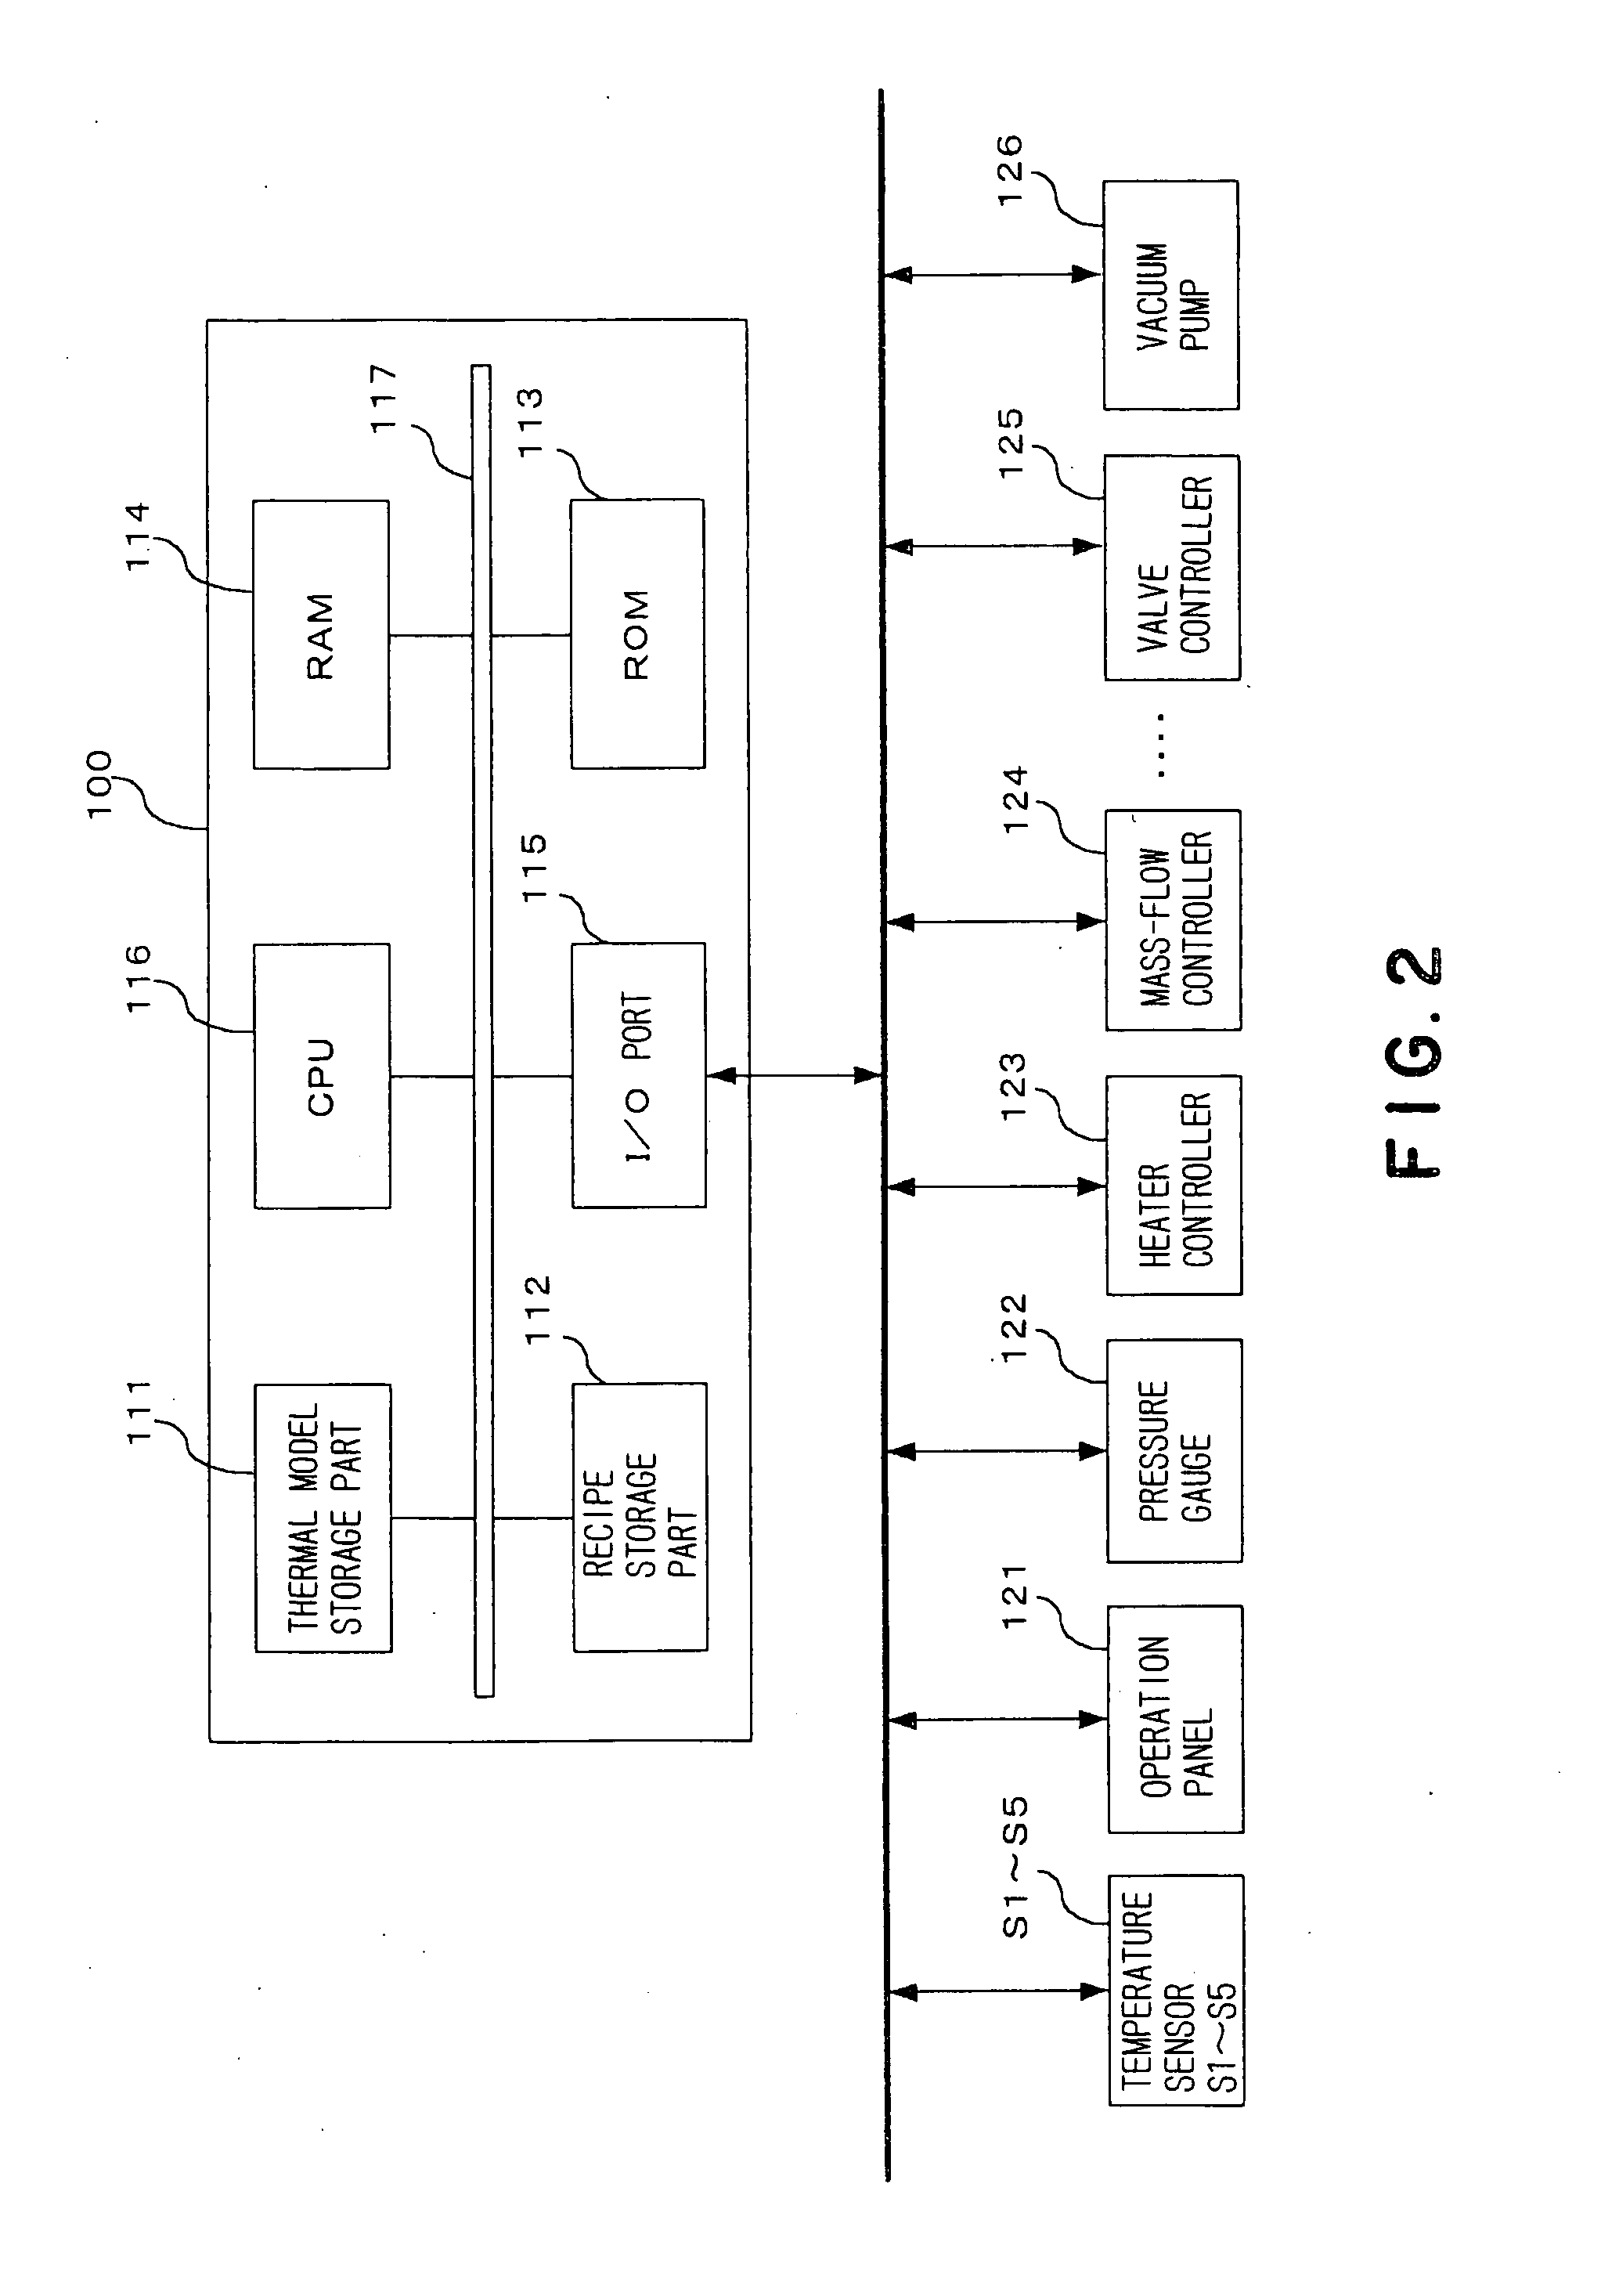 Heat treatment apparatus and method of calibrating the apparatus